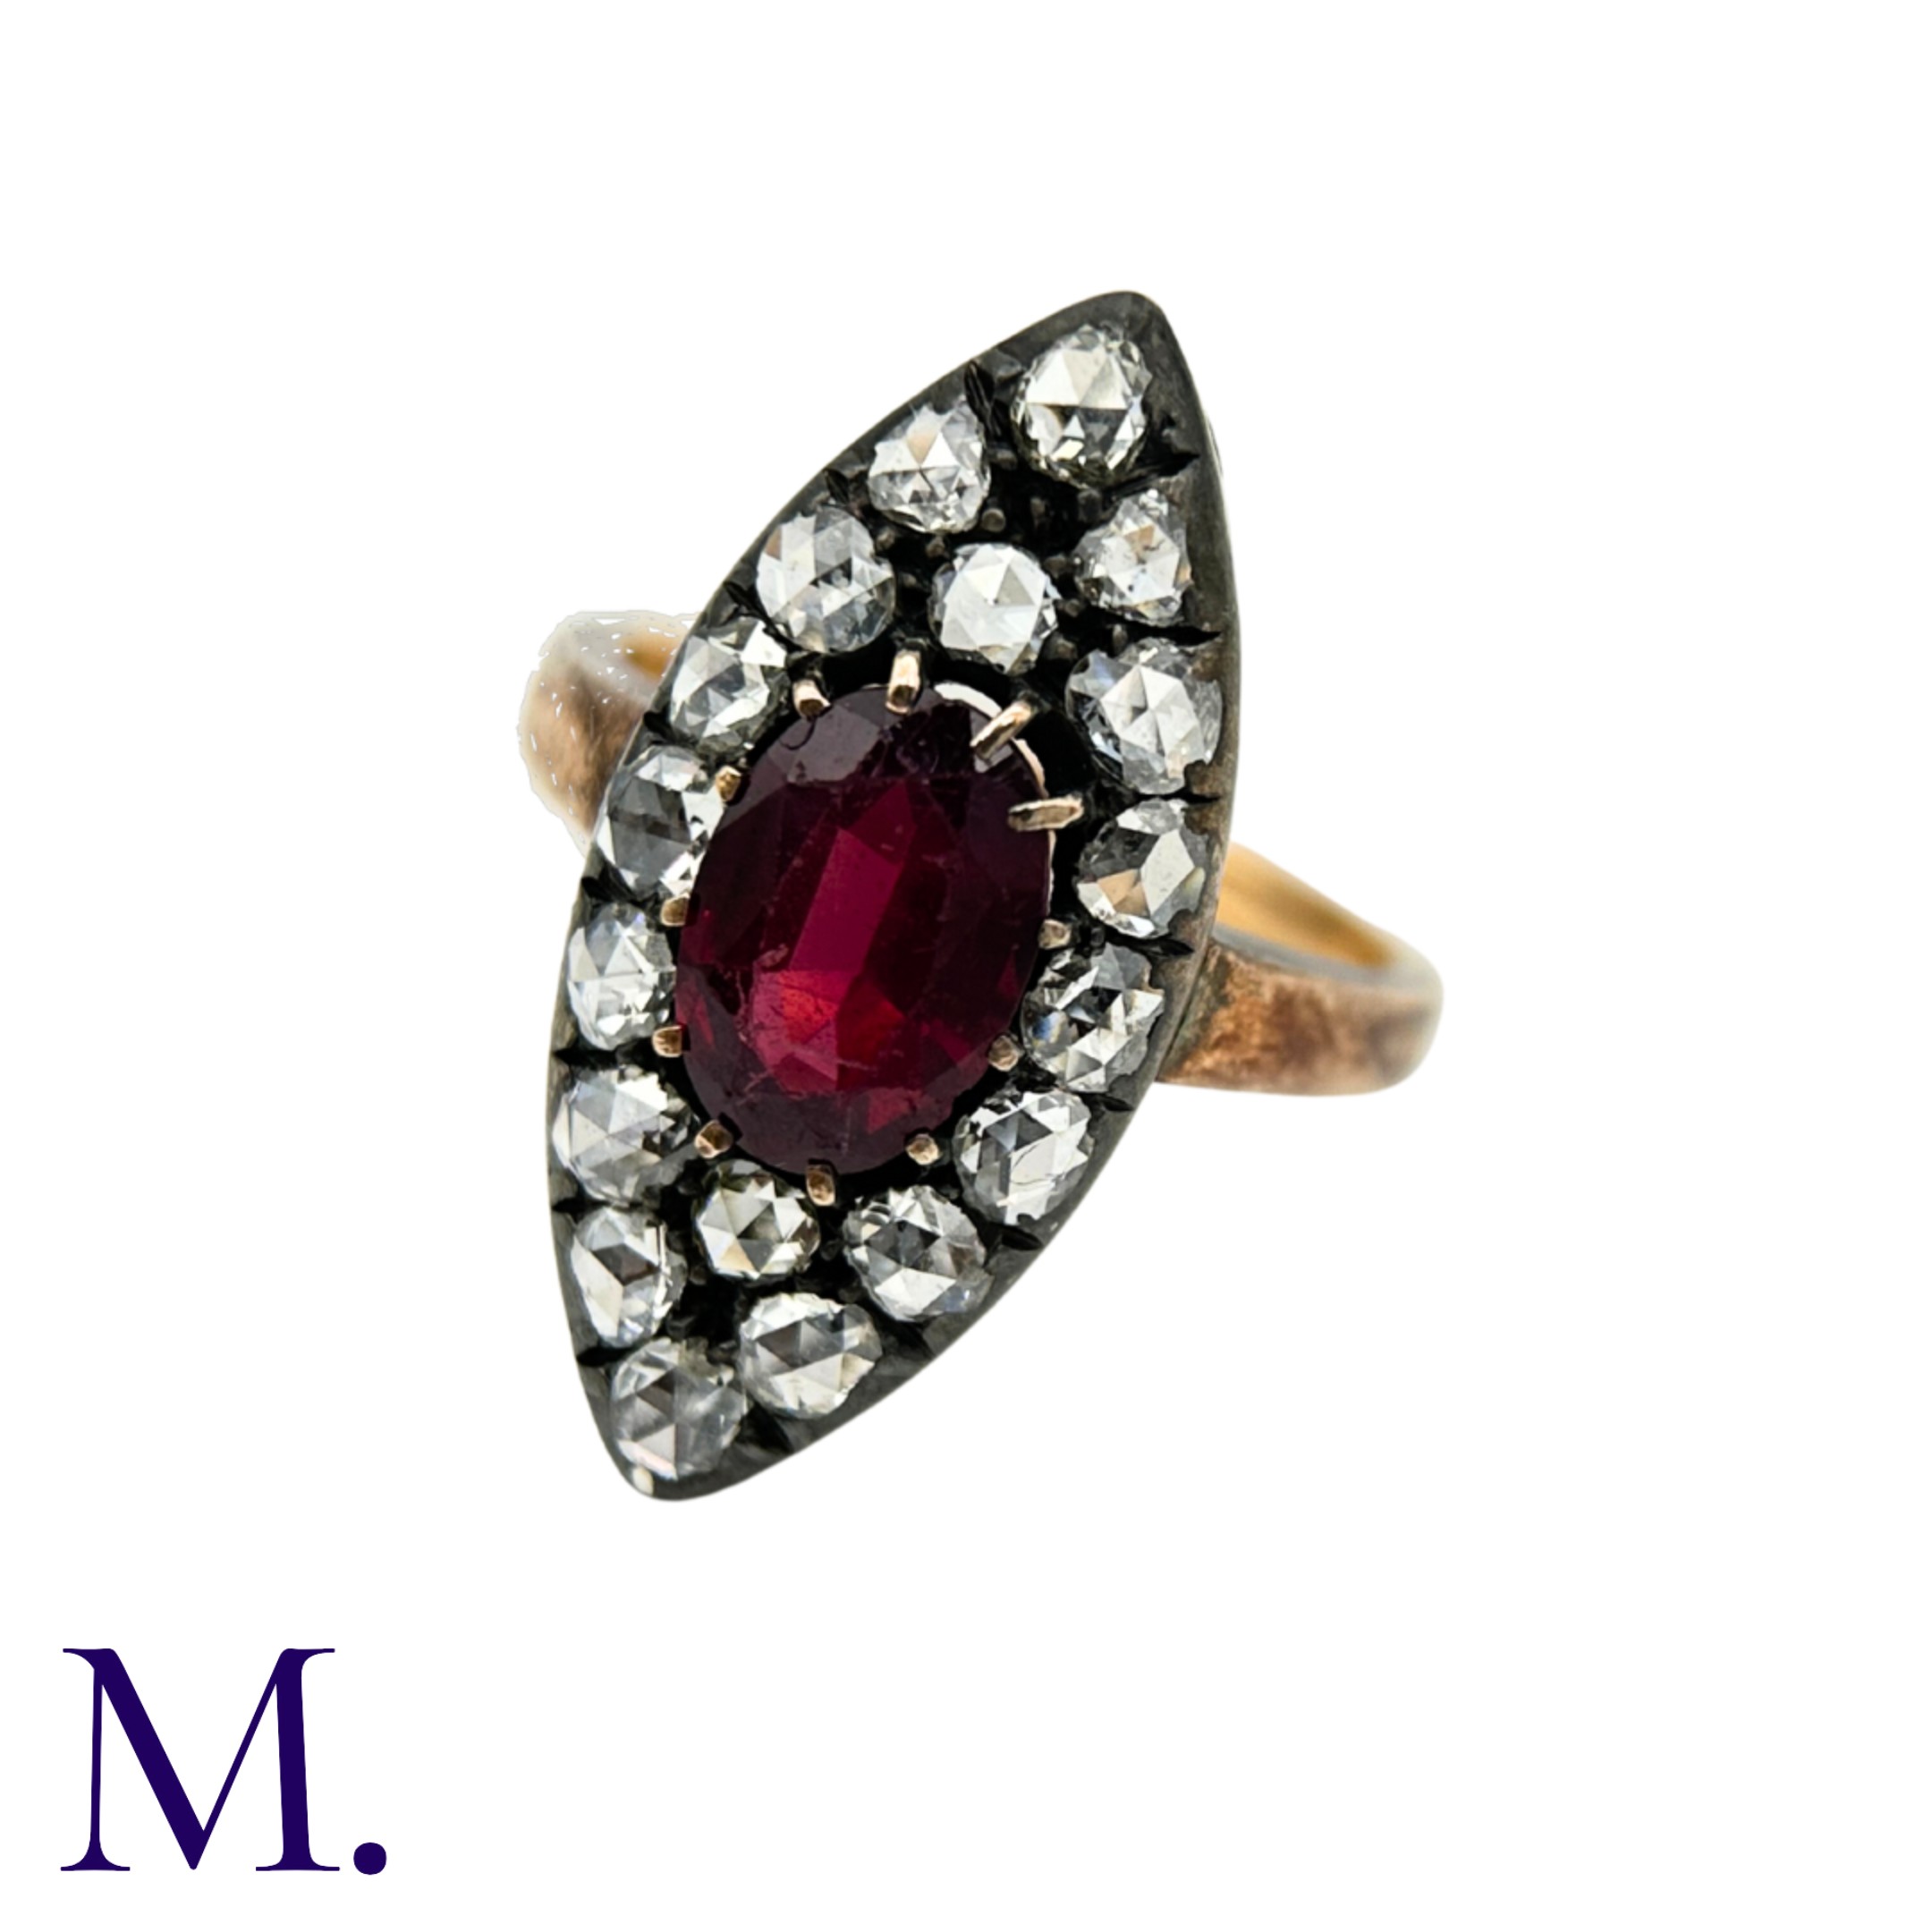 An Antique Garnet and Rose Diamond Marquise Ring The marquise-shaped ring is set with a deep